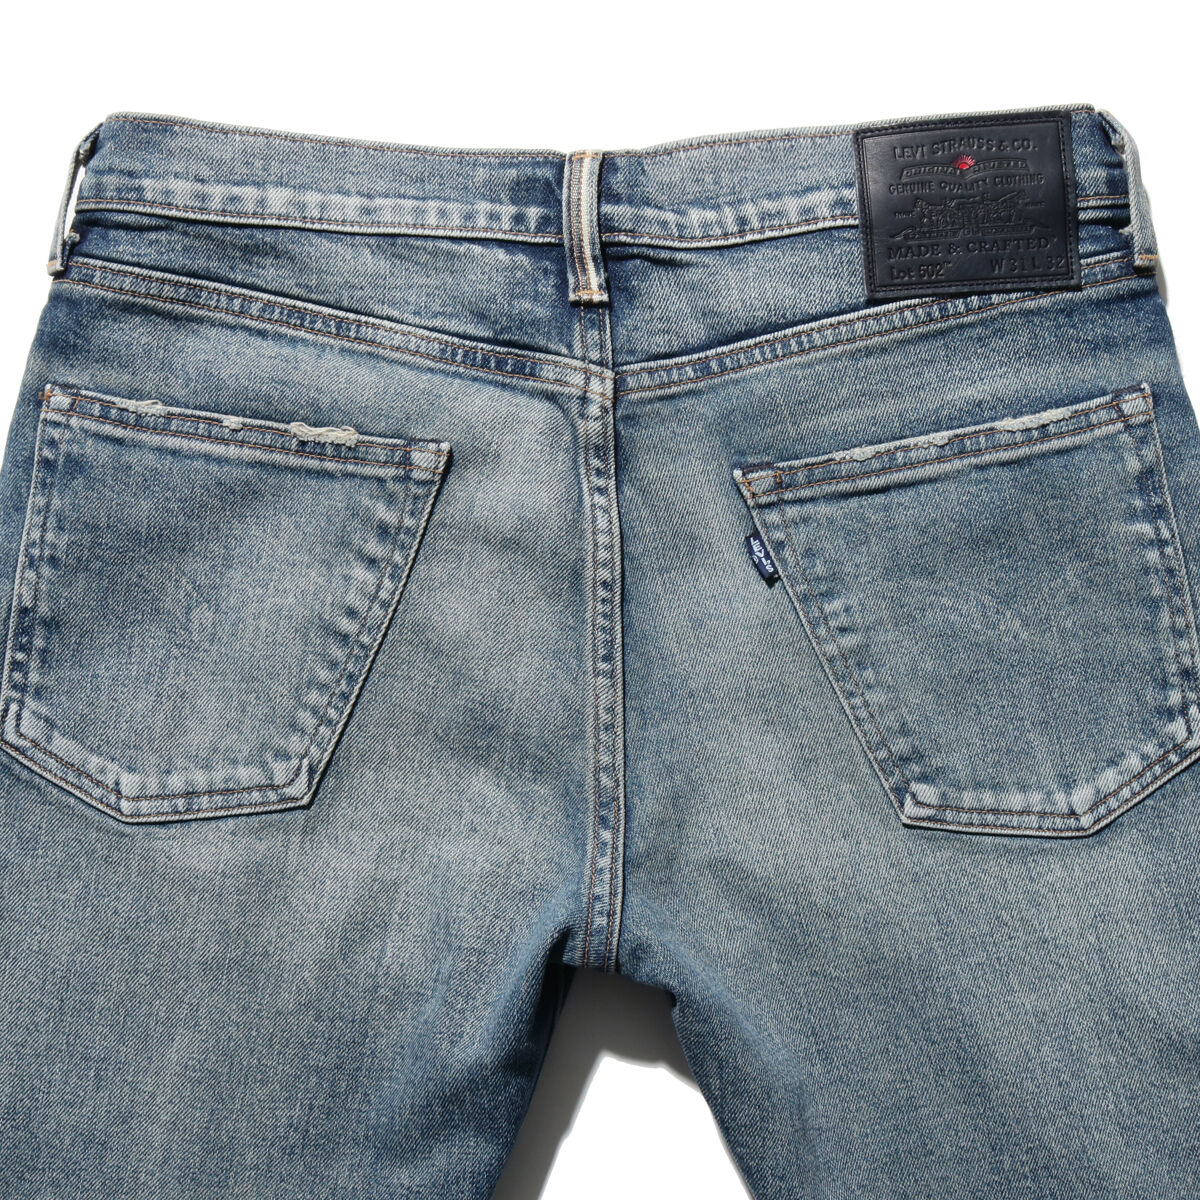 LEVI'S®MADE&CRAFTED® 502™ SUSUKI MADE IN JAPAN